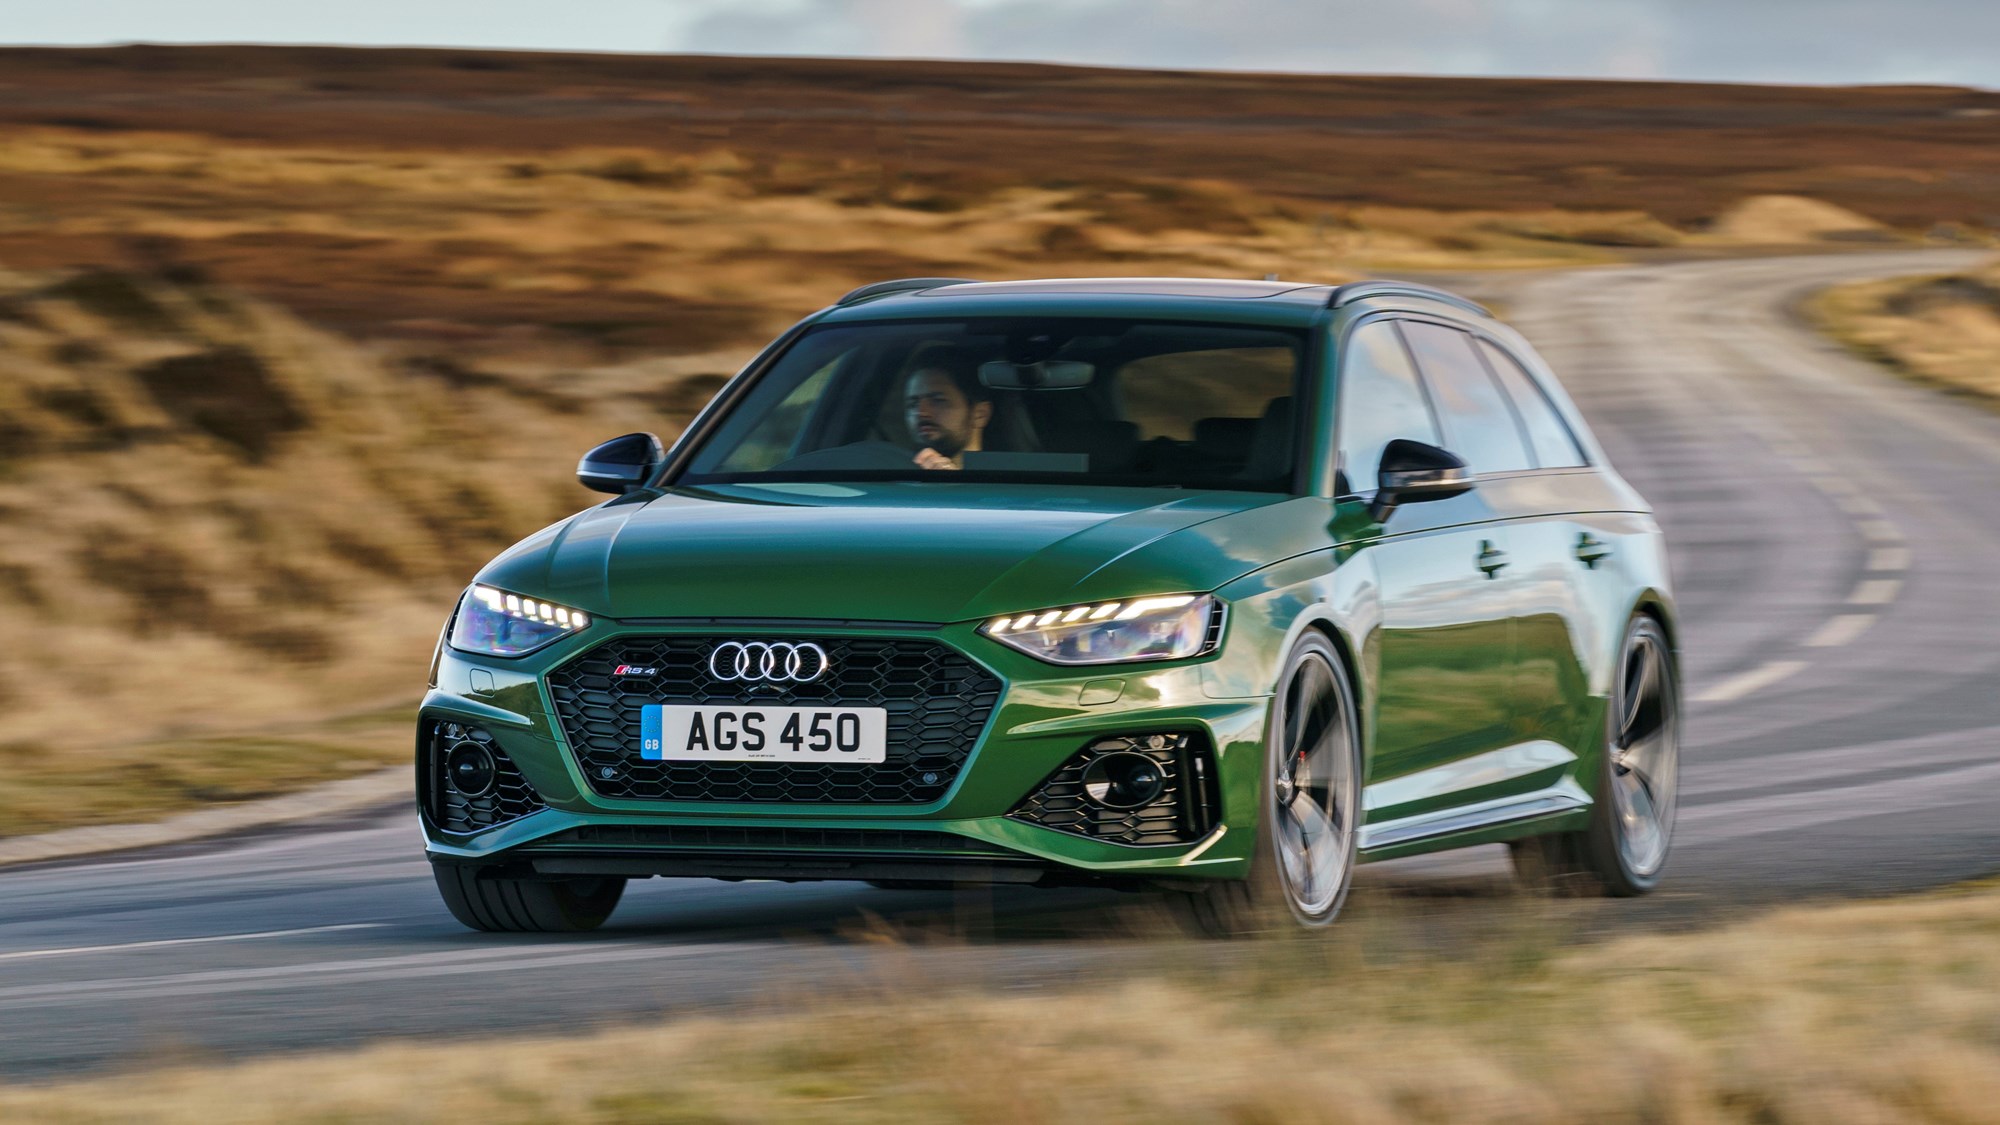 Audi RS4 Avant (2022) review: a real-world supercar with space | CAR Magazine